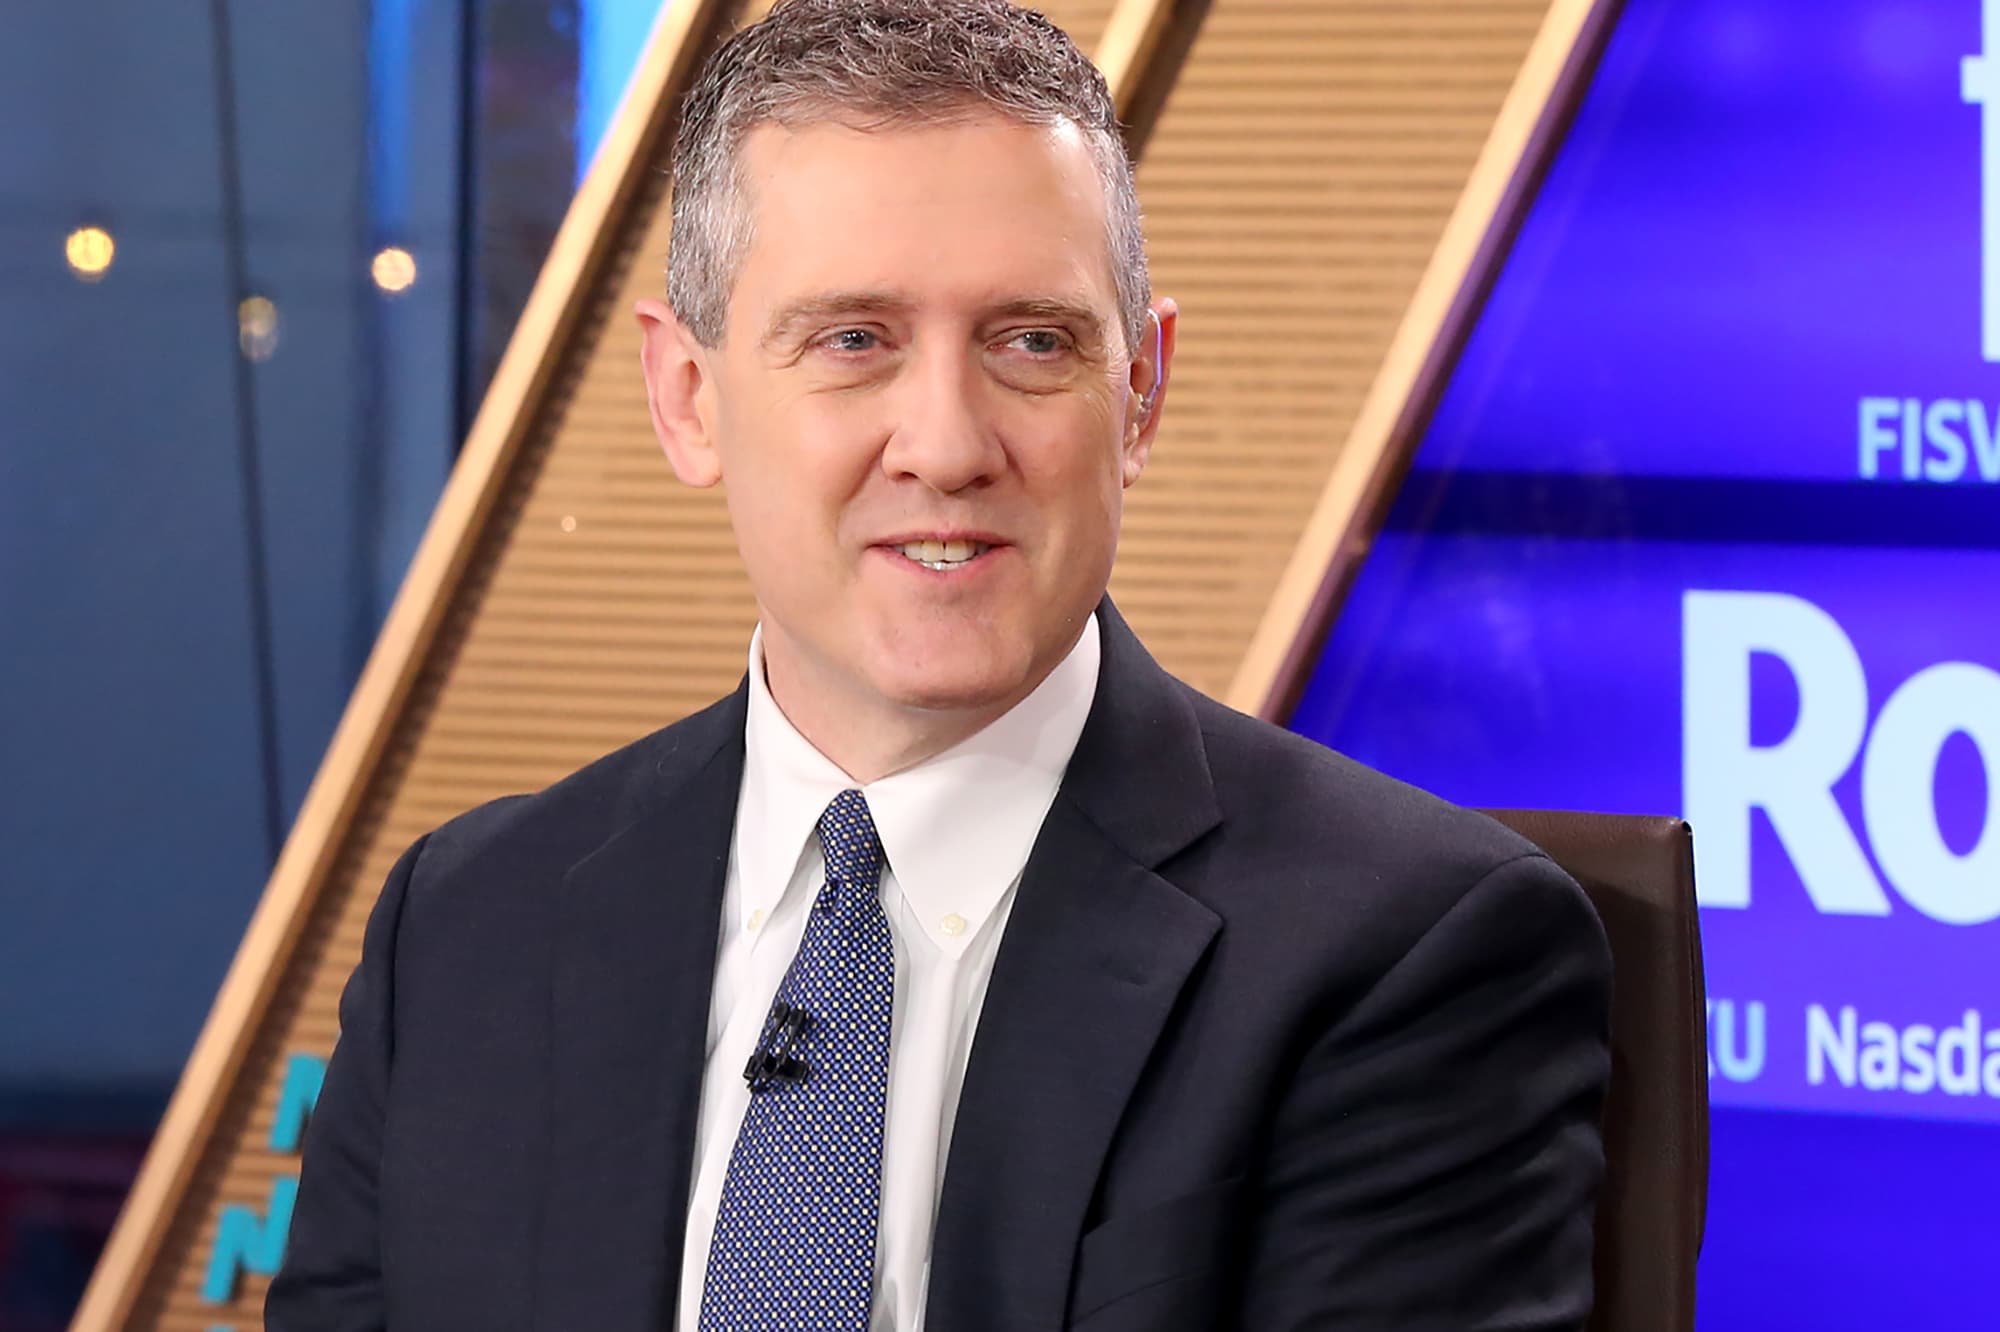 Fed’s Bullard says inflation ‘could get out of control,’ so action is needed now